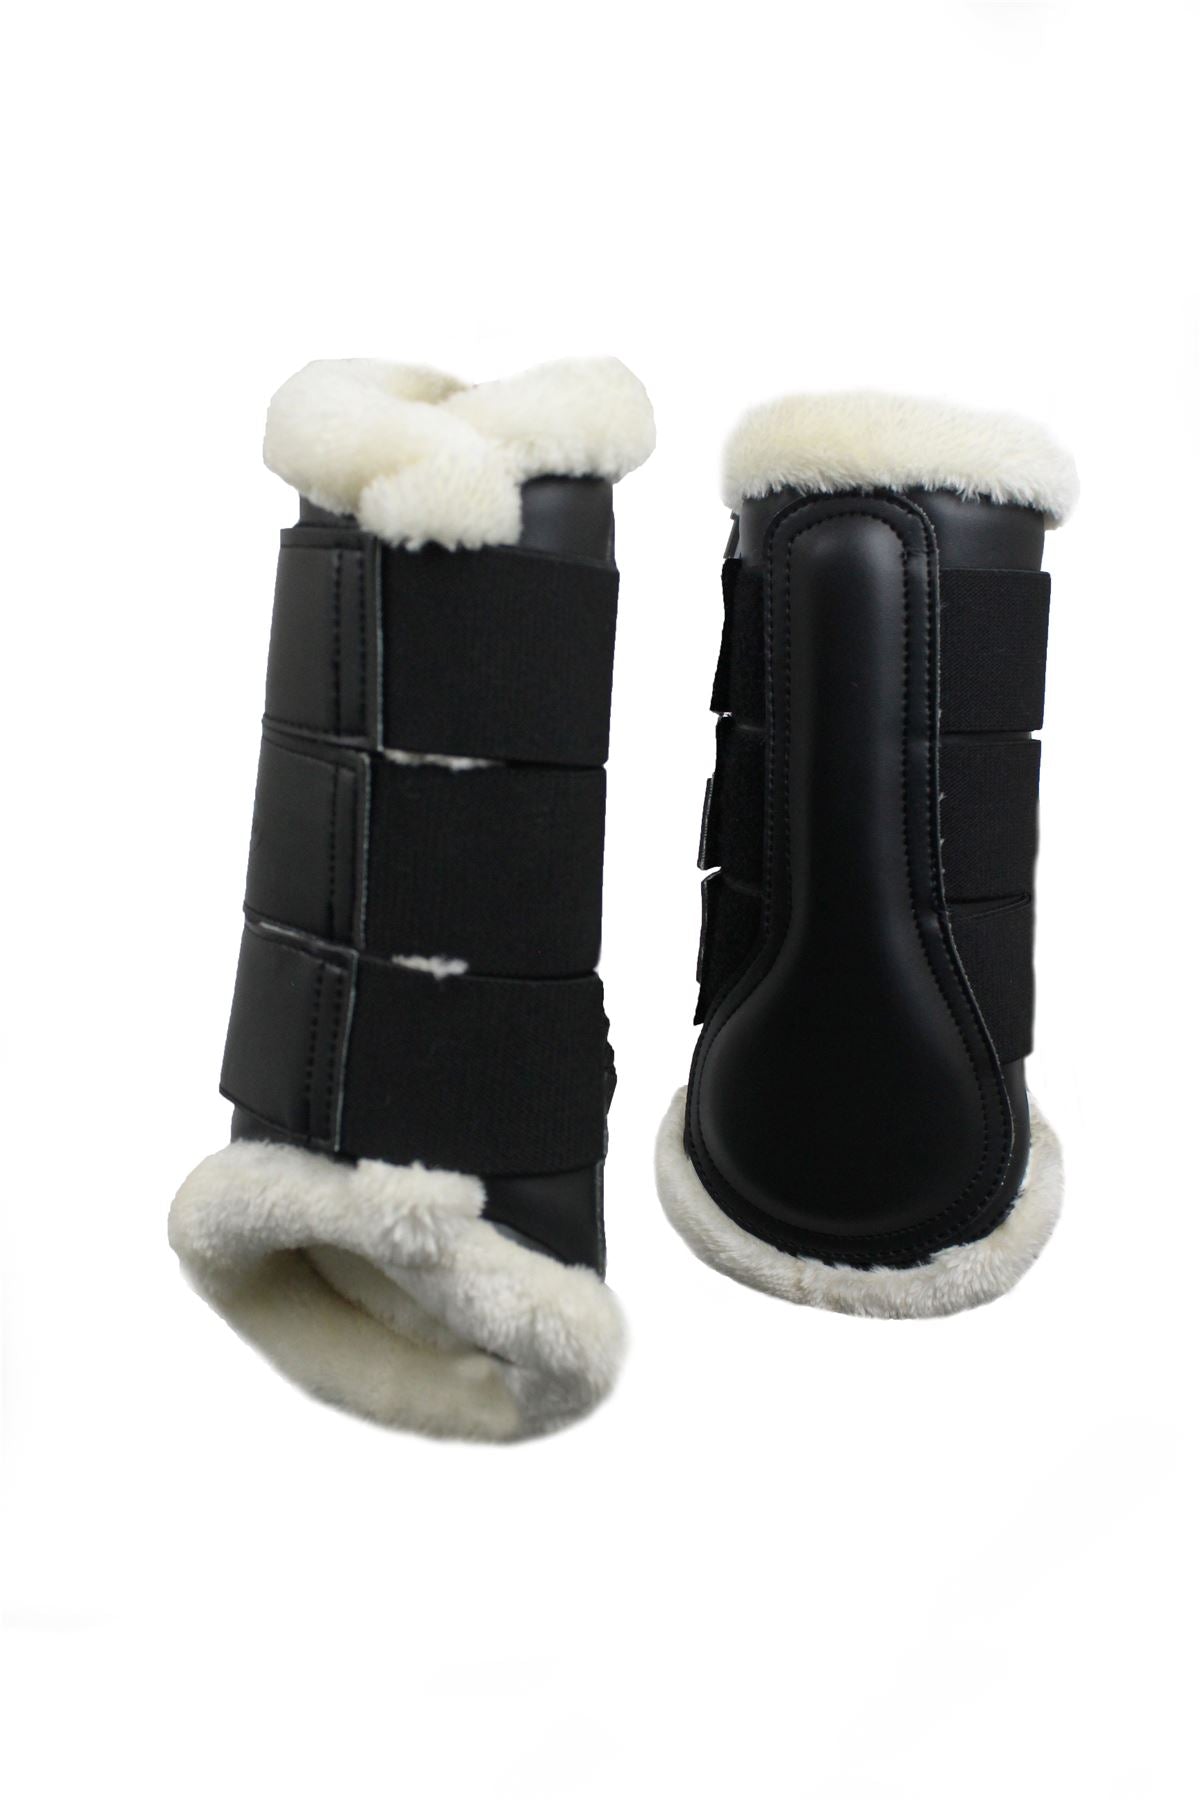 Gallop Equestrian Prestige Faux Fur Brushing Boot - Just Horse Riders